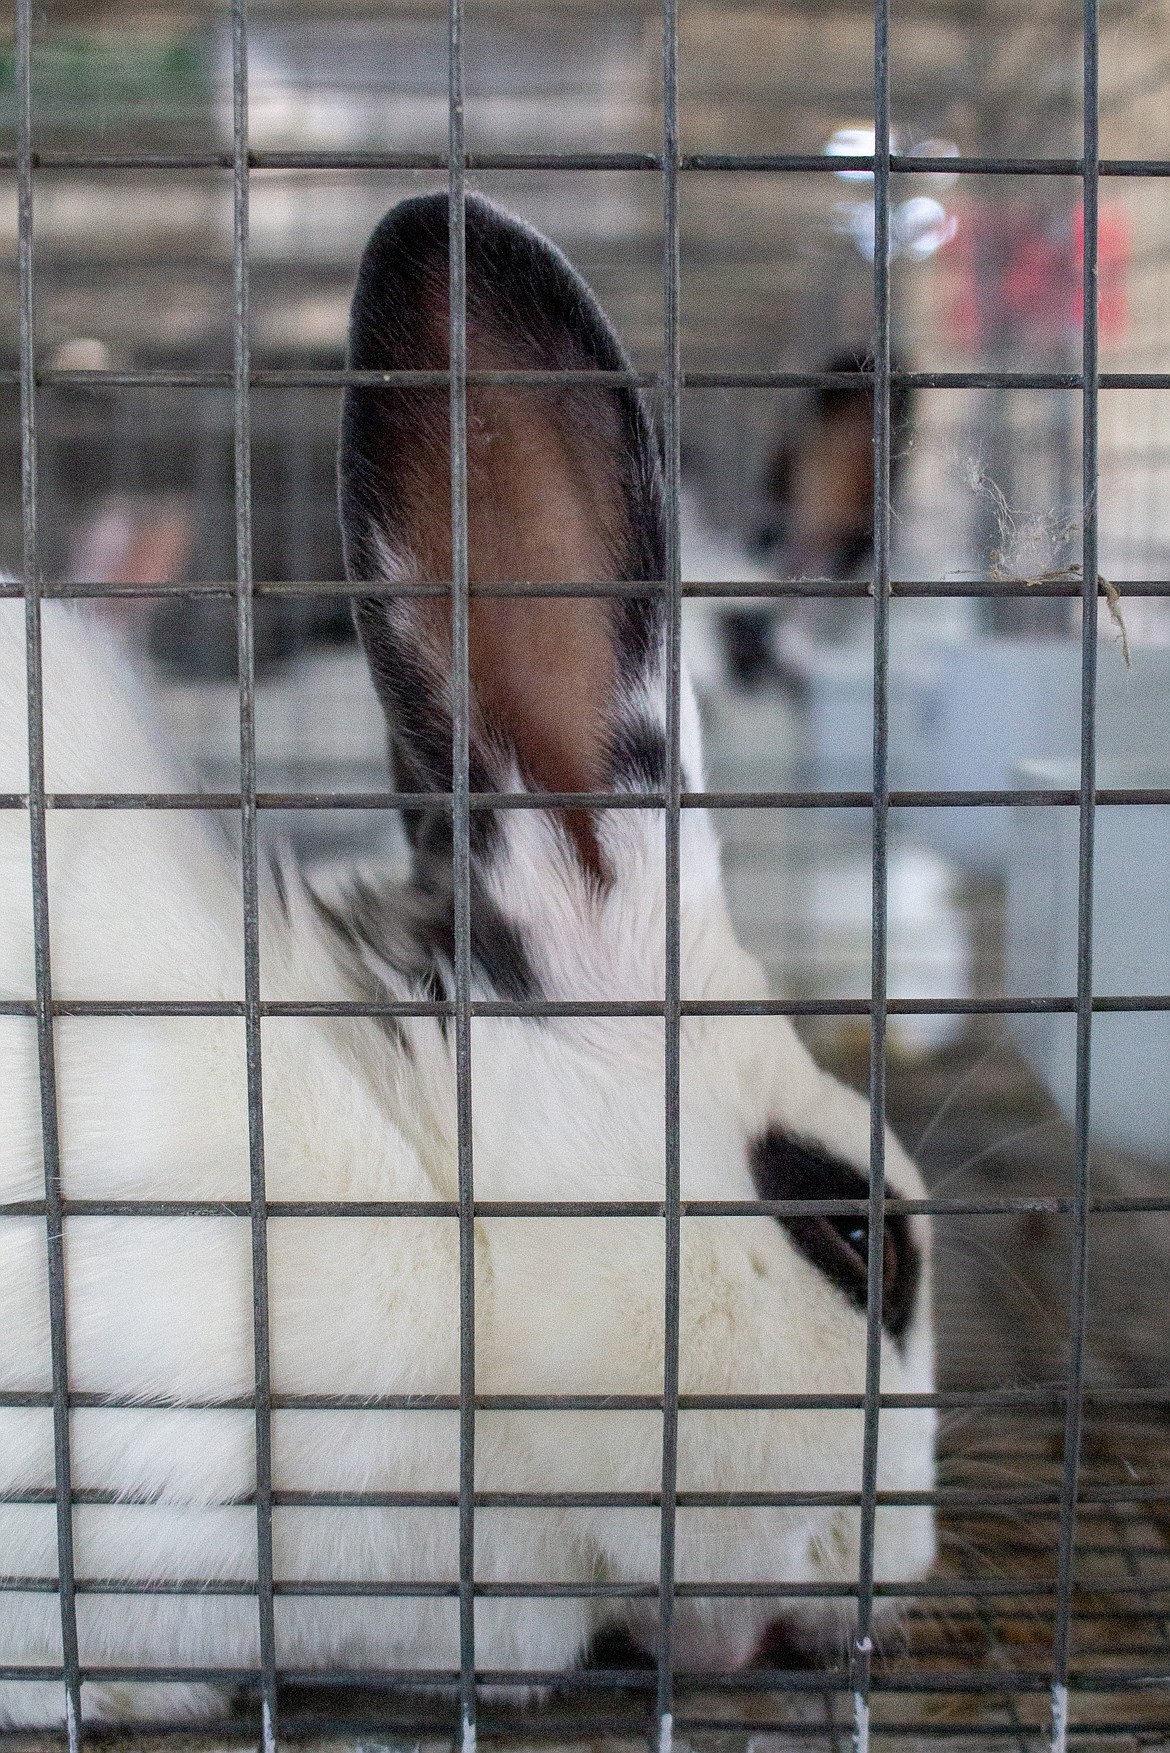 Market rabbits feed inside their cages in the rabbit barn at the Grant County Fairgrounds on Wednesday afternoon in preparation for this week’s livestock sale.